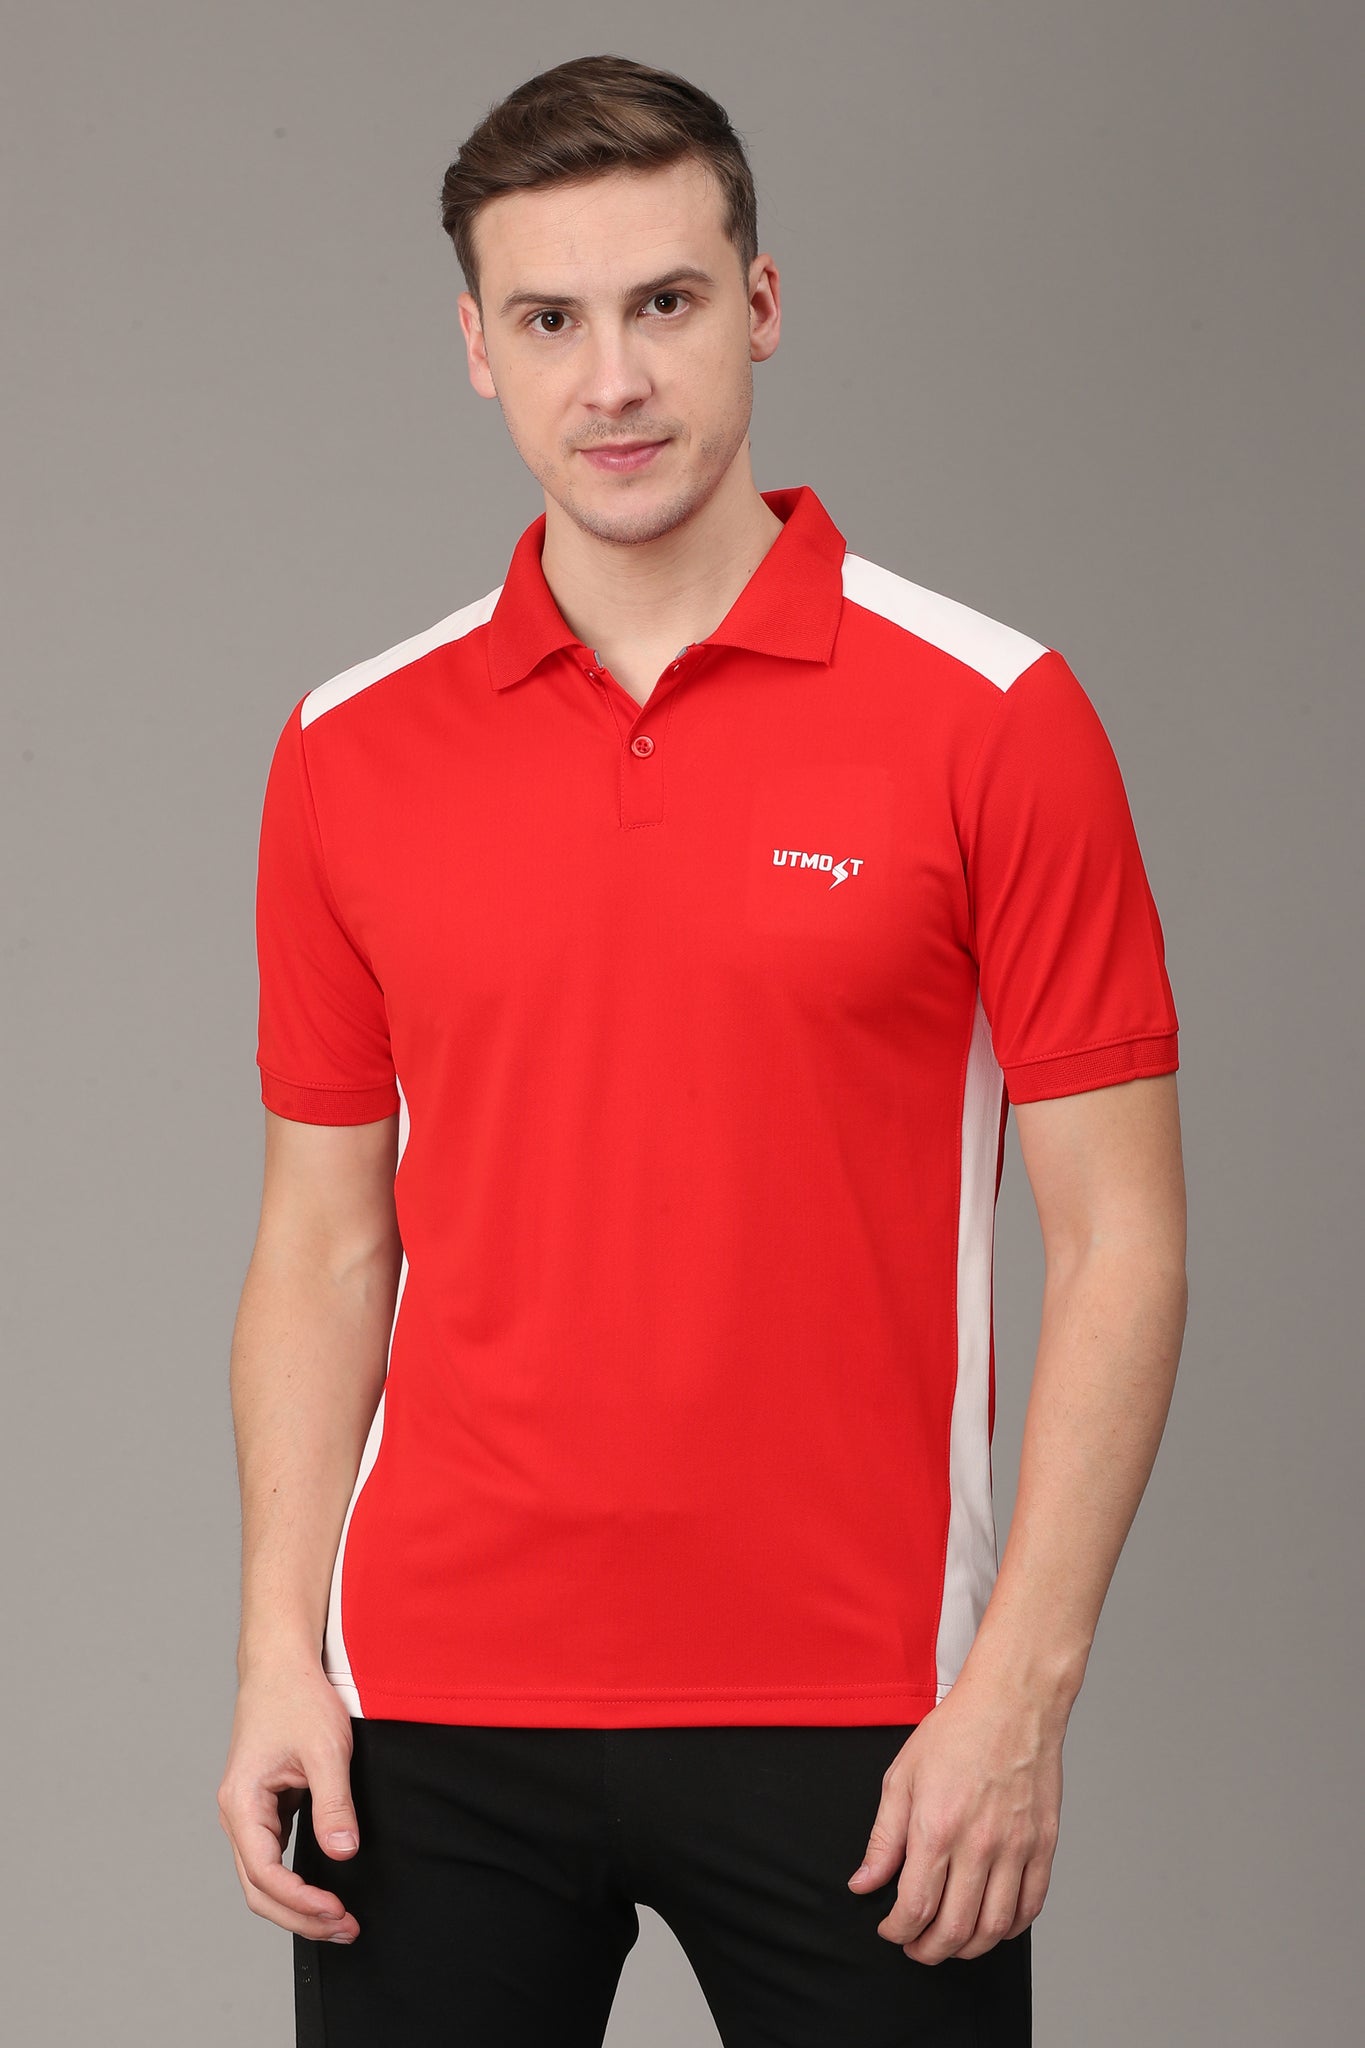 White Strip on Red Polo T-Shirt